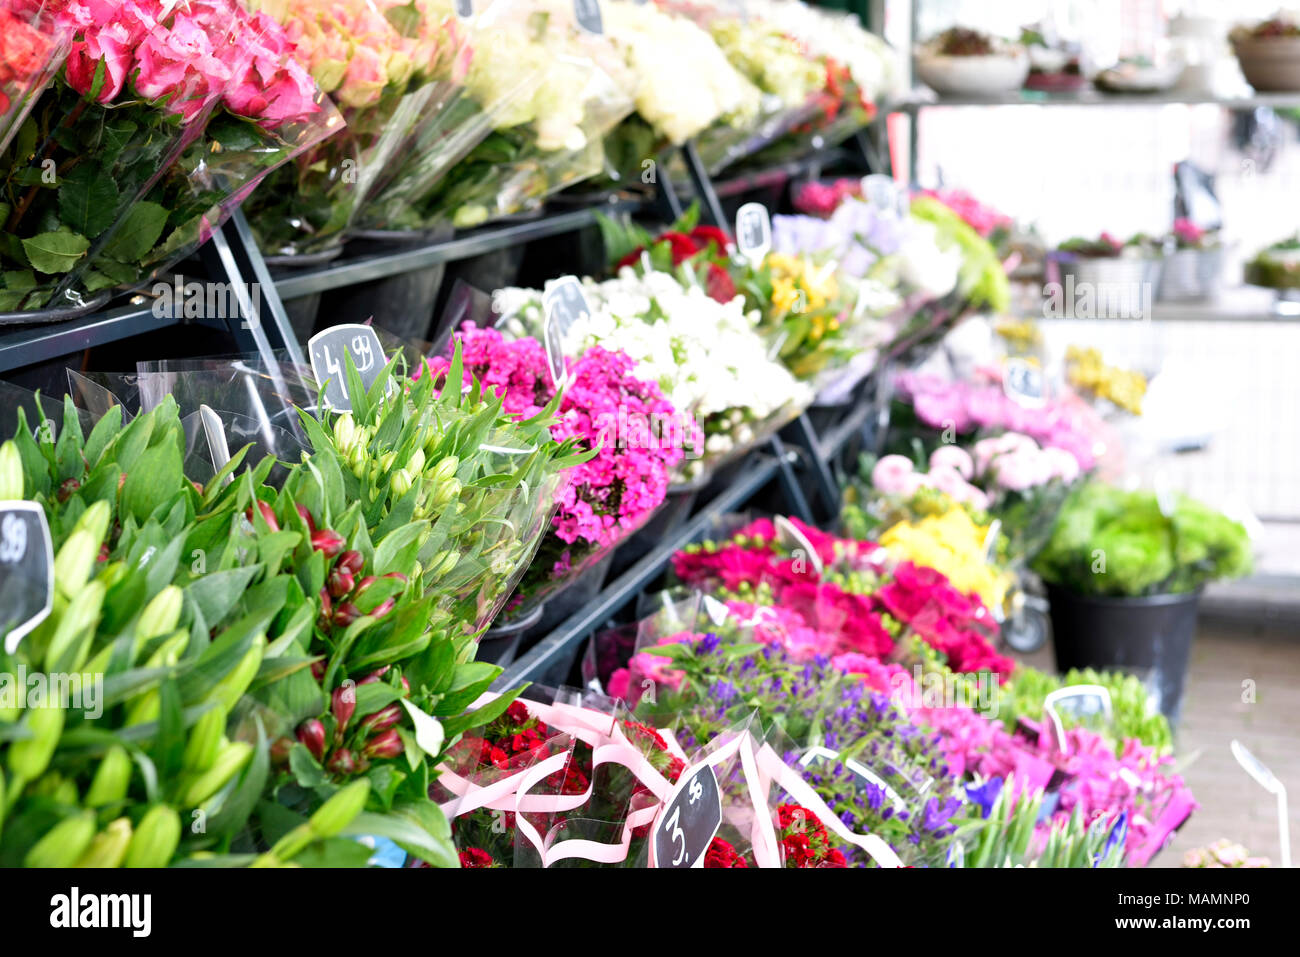 Flower market or flower bouquets at a street market stall with displays and selective focus. Stock Photo